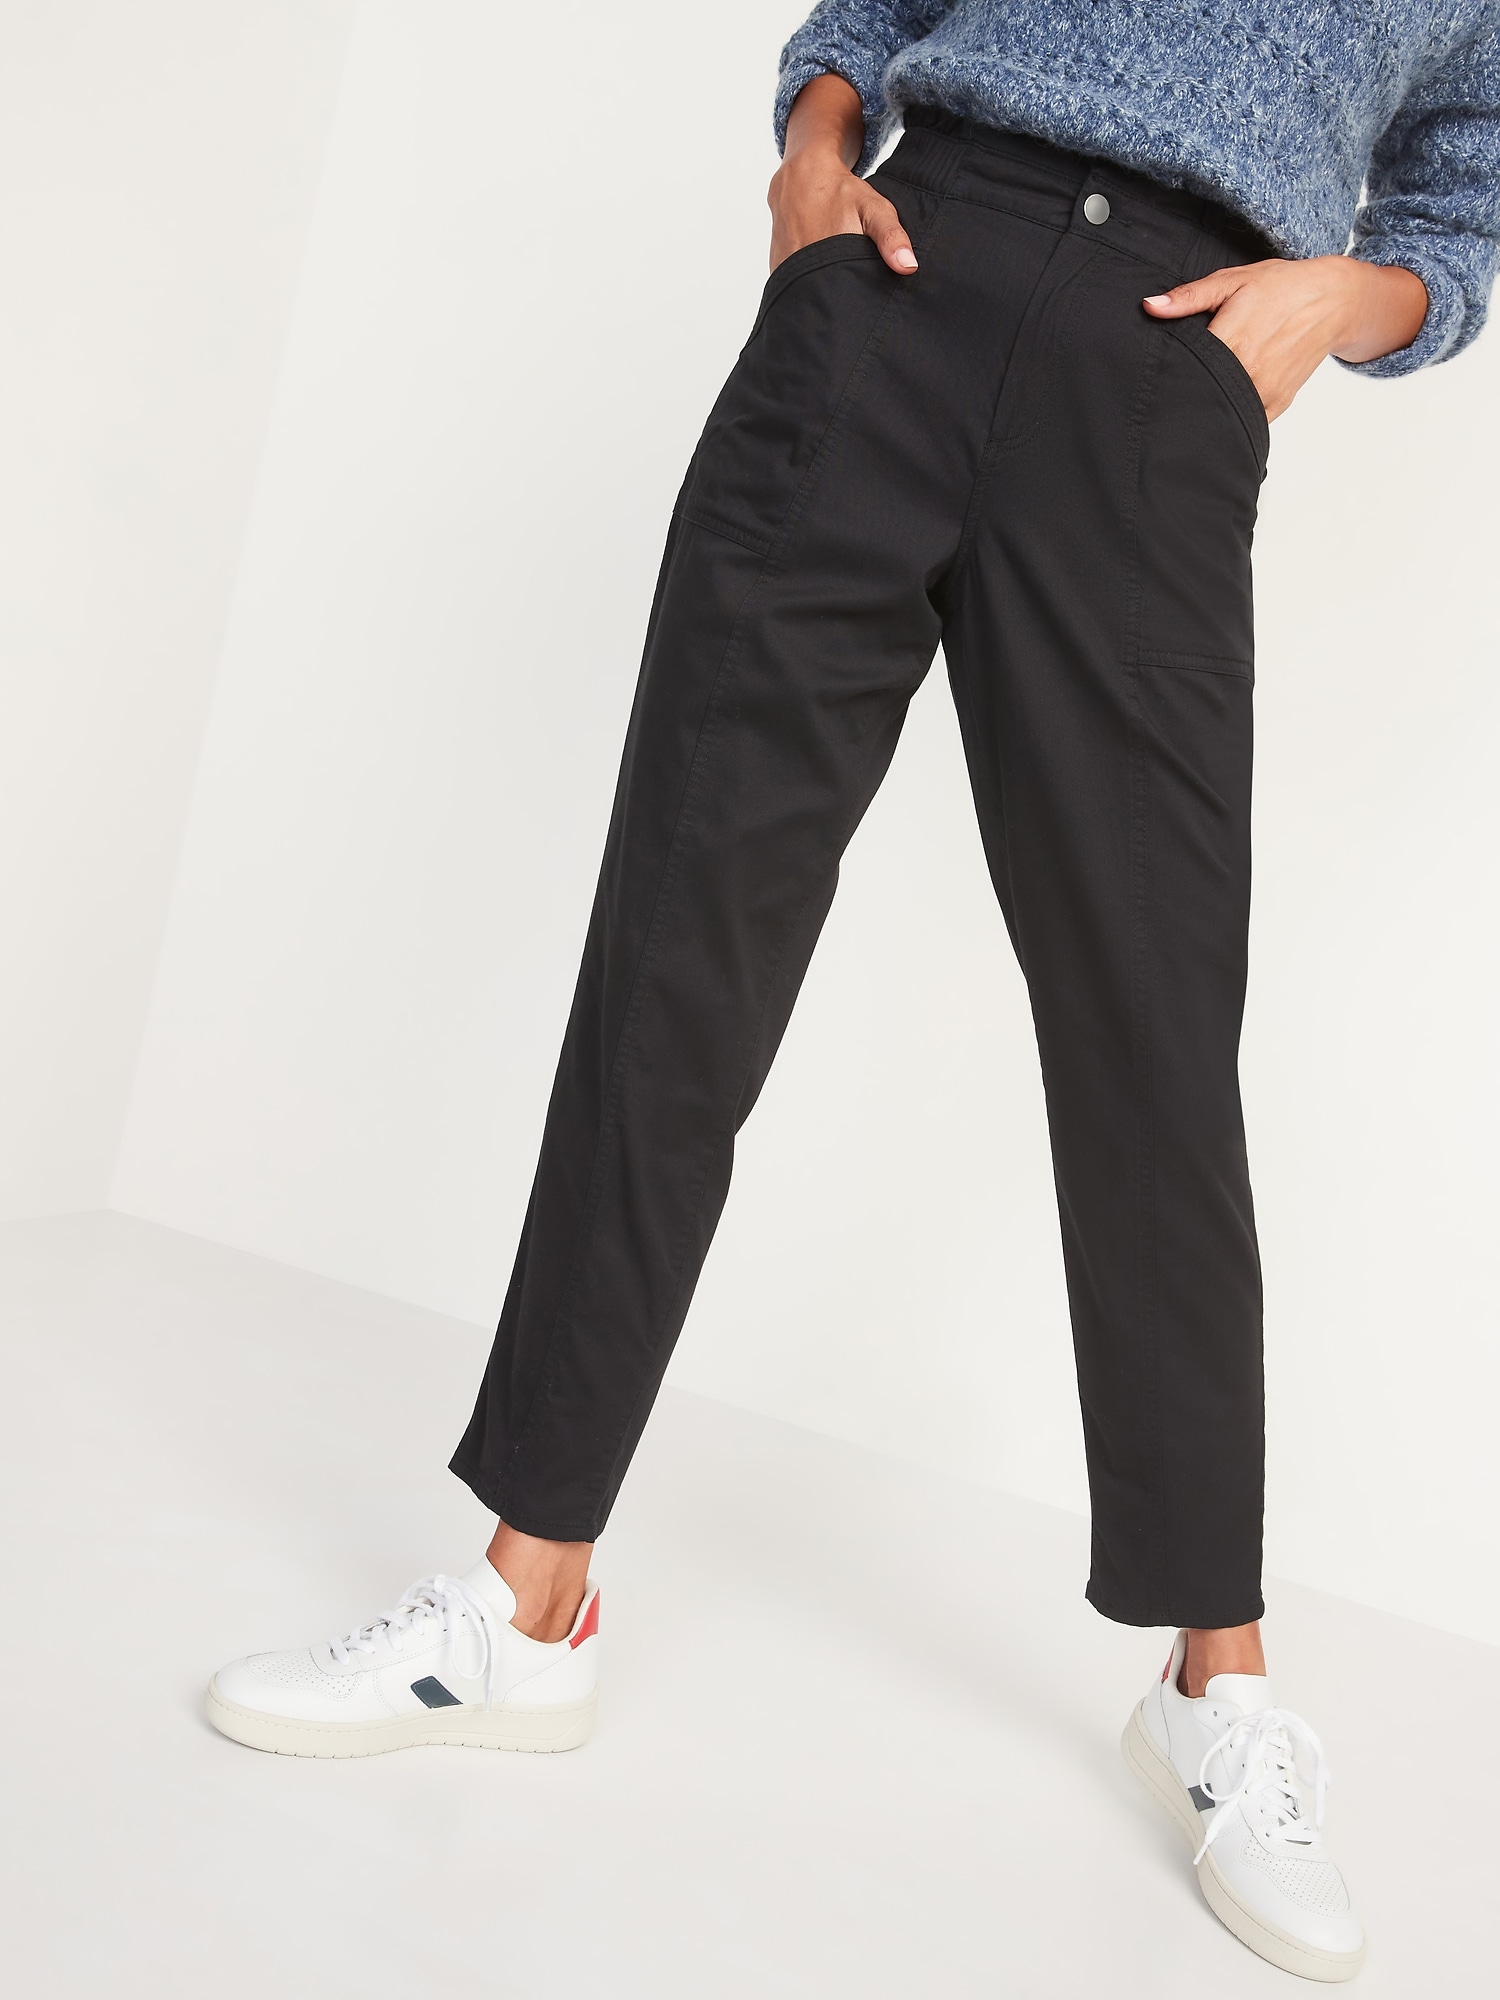 Shop Christy Belted Pant in Navy